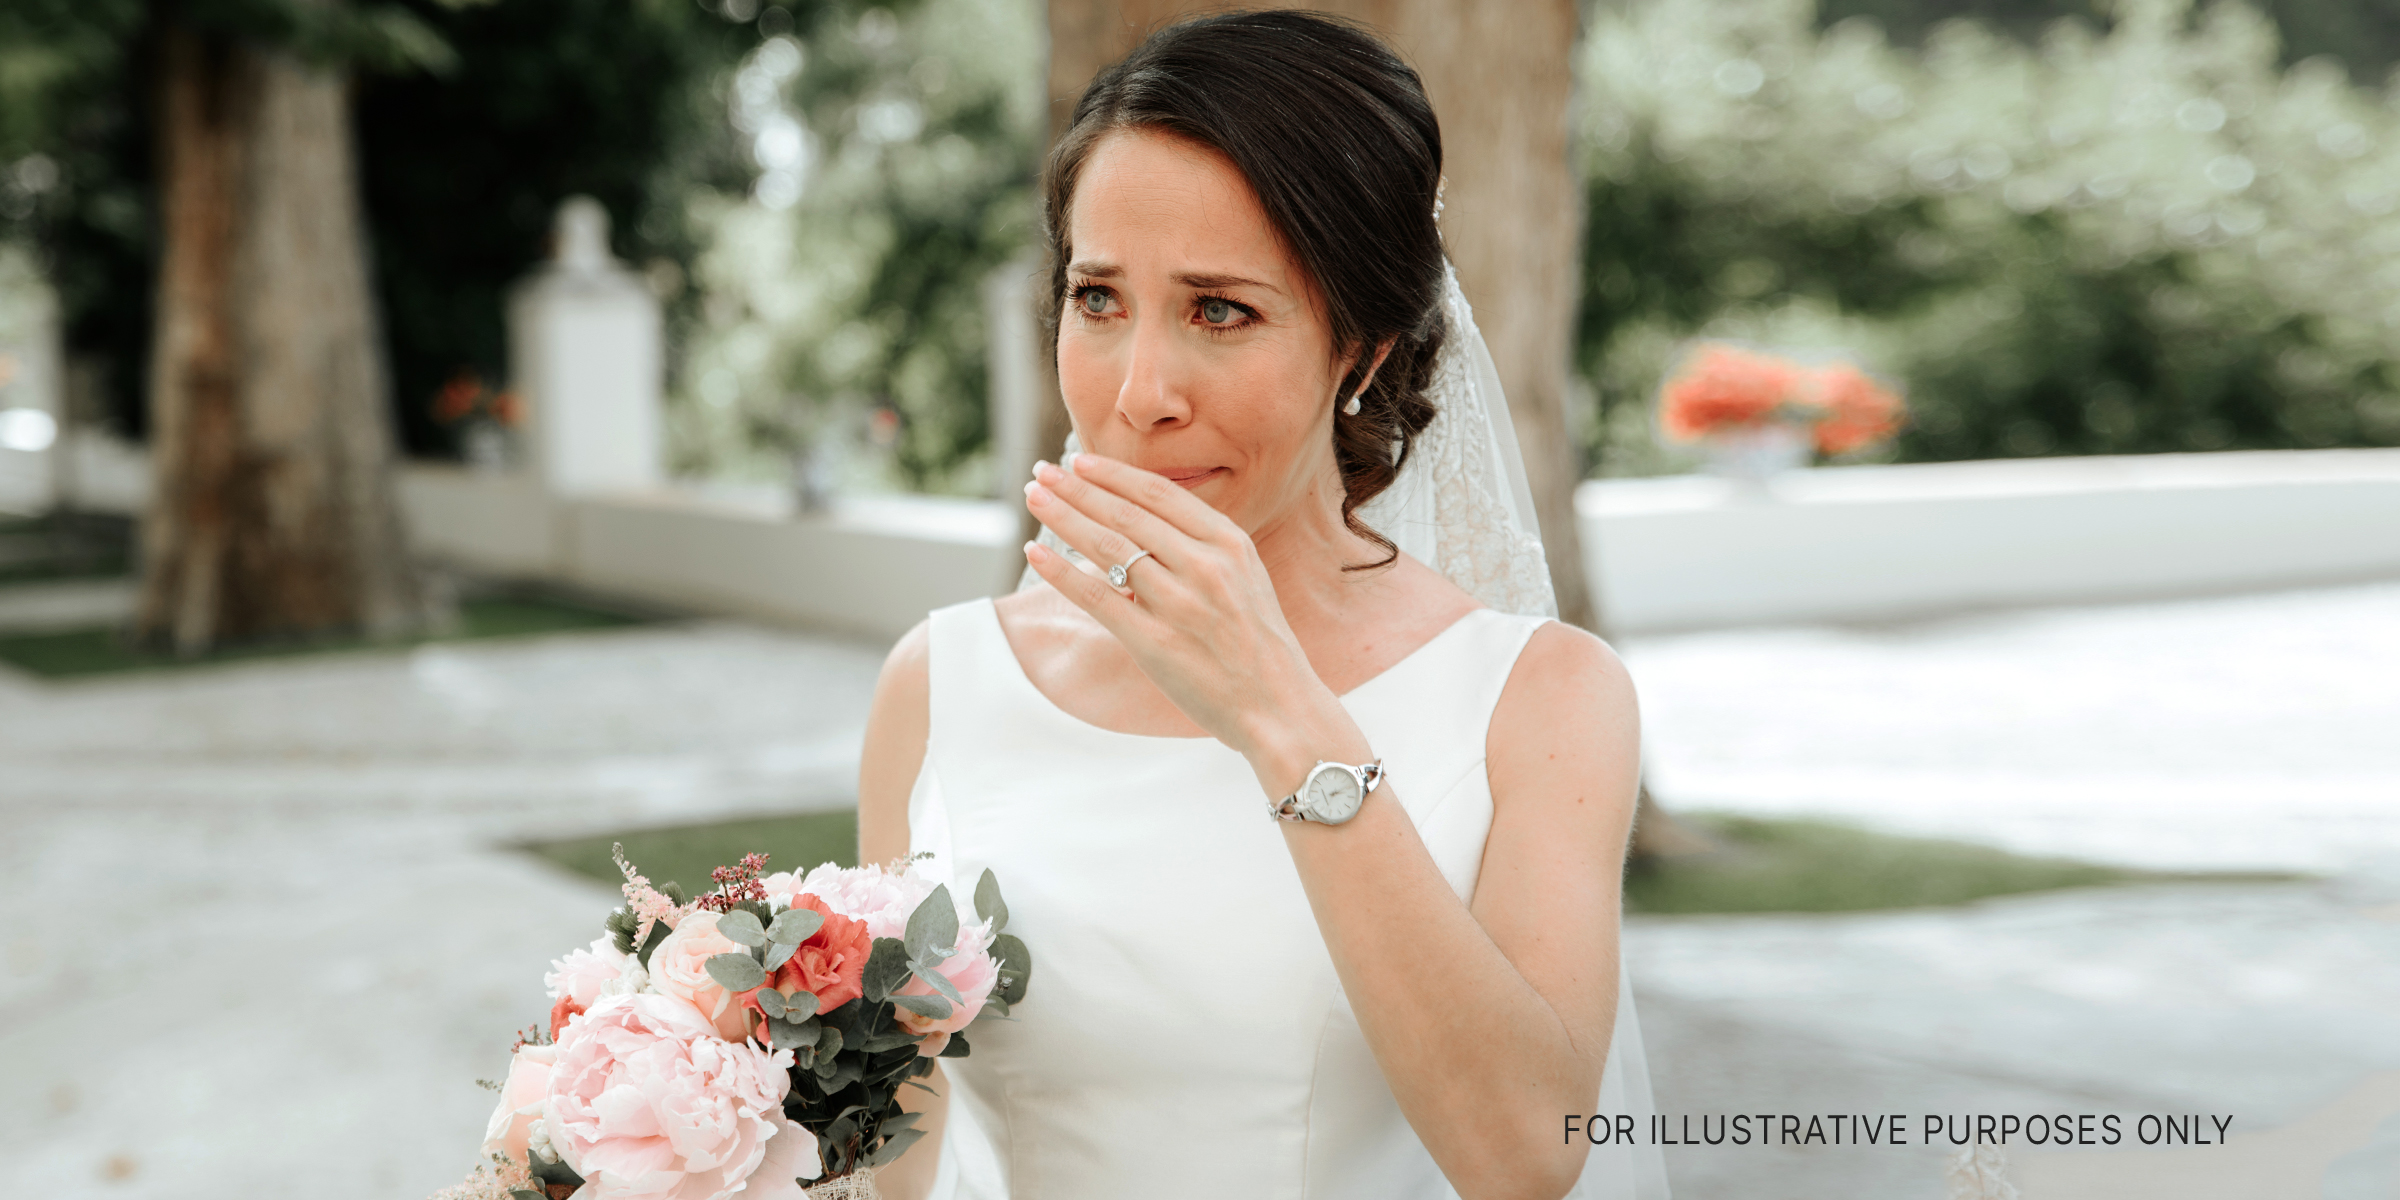 Crying bride | Source: Shutterstock